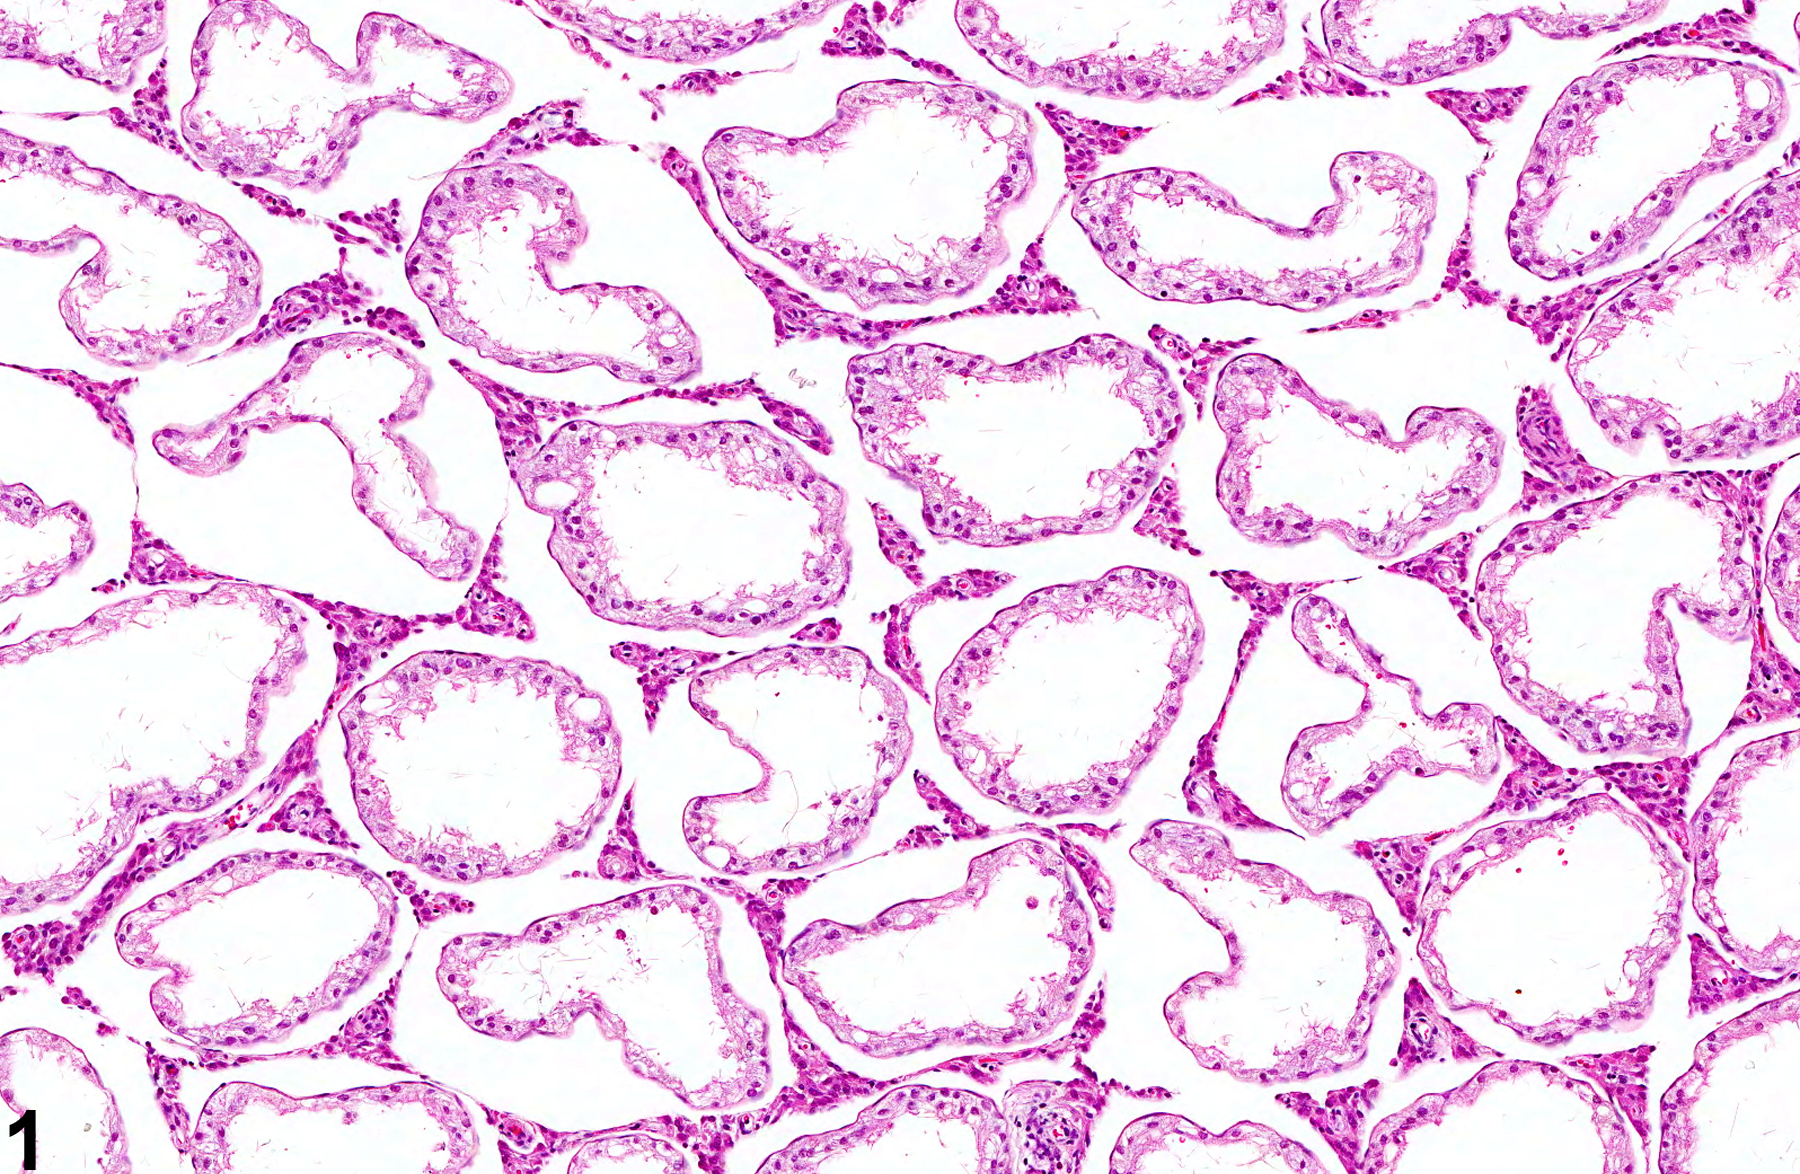 Image of germinal epithelium atrophy in the testis from a male F344/N rat in a subchronic study